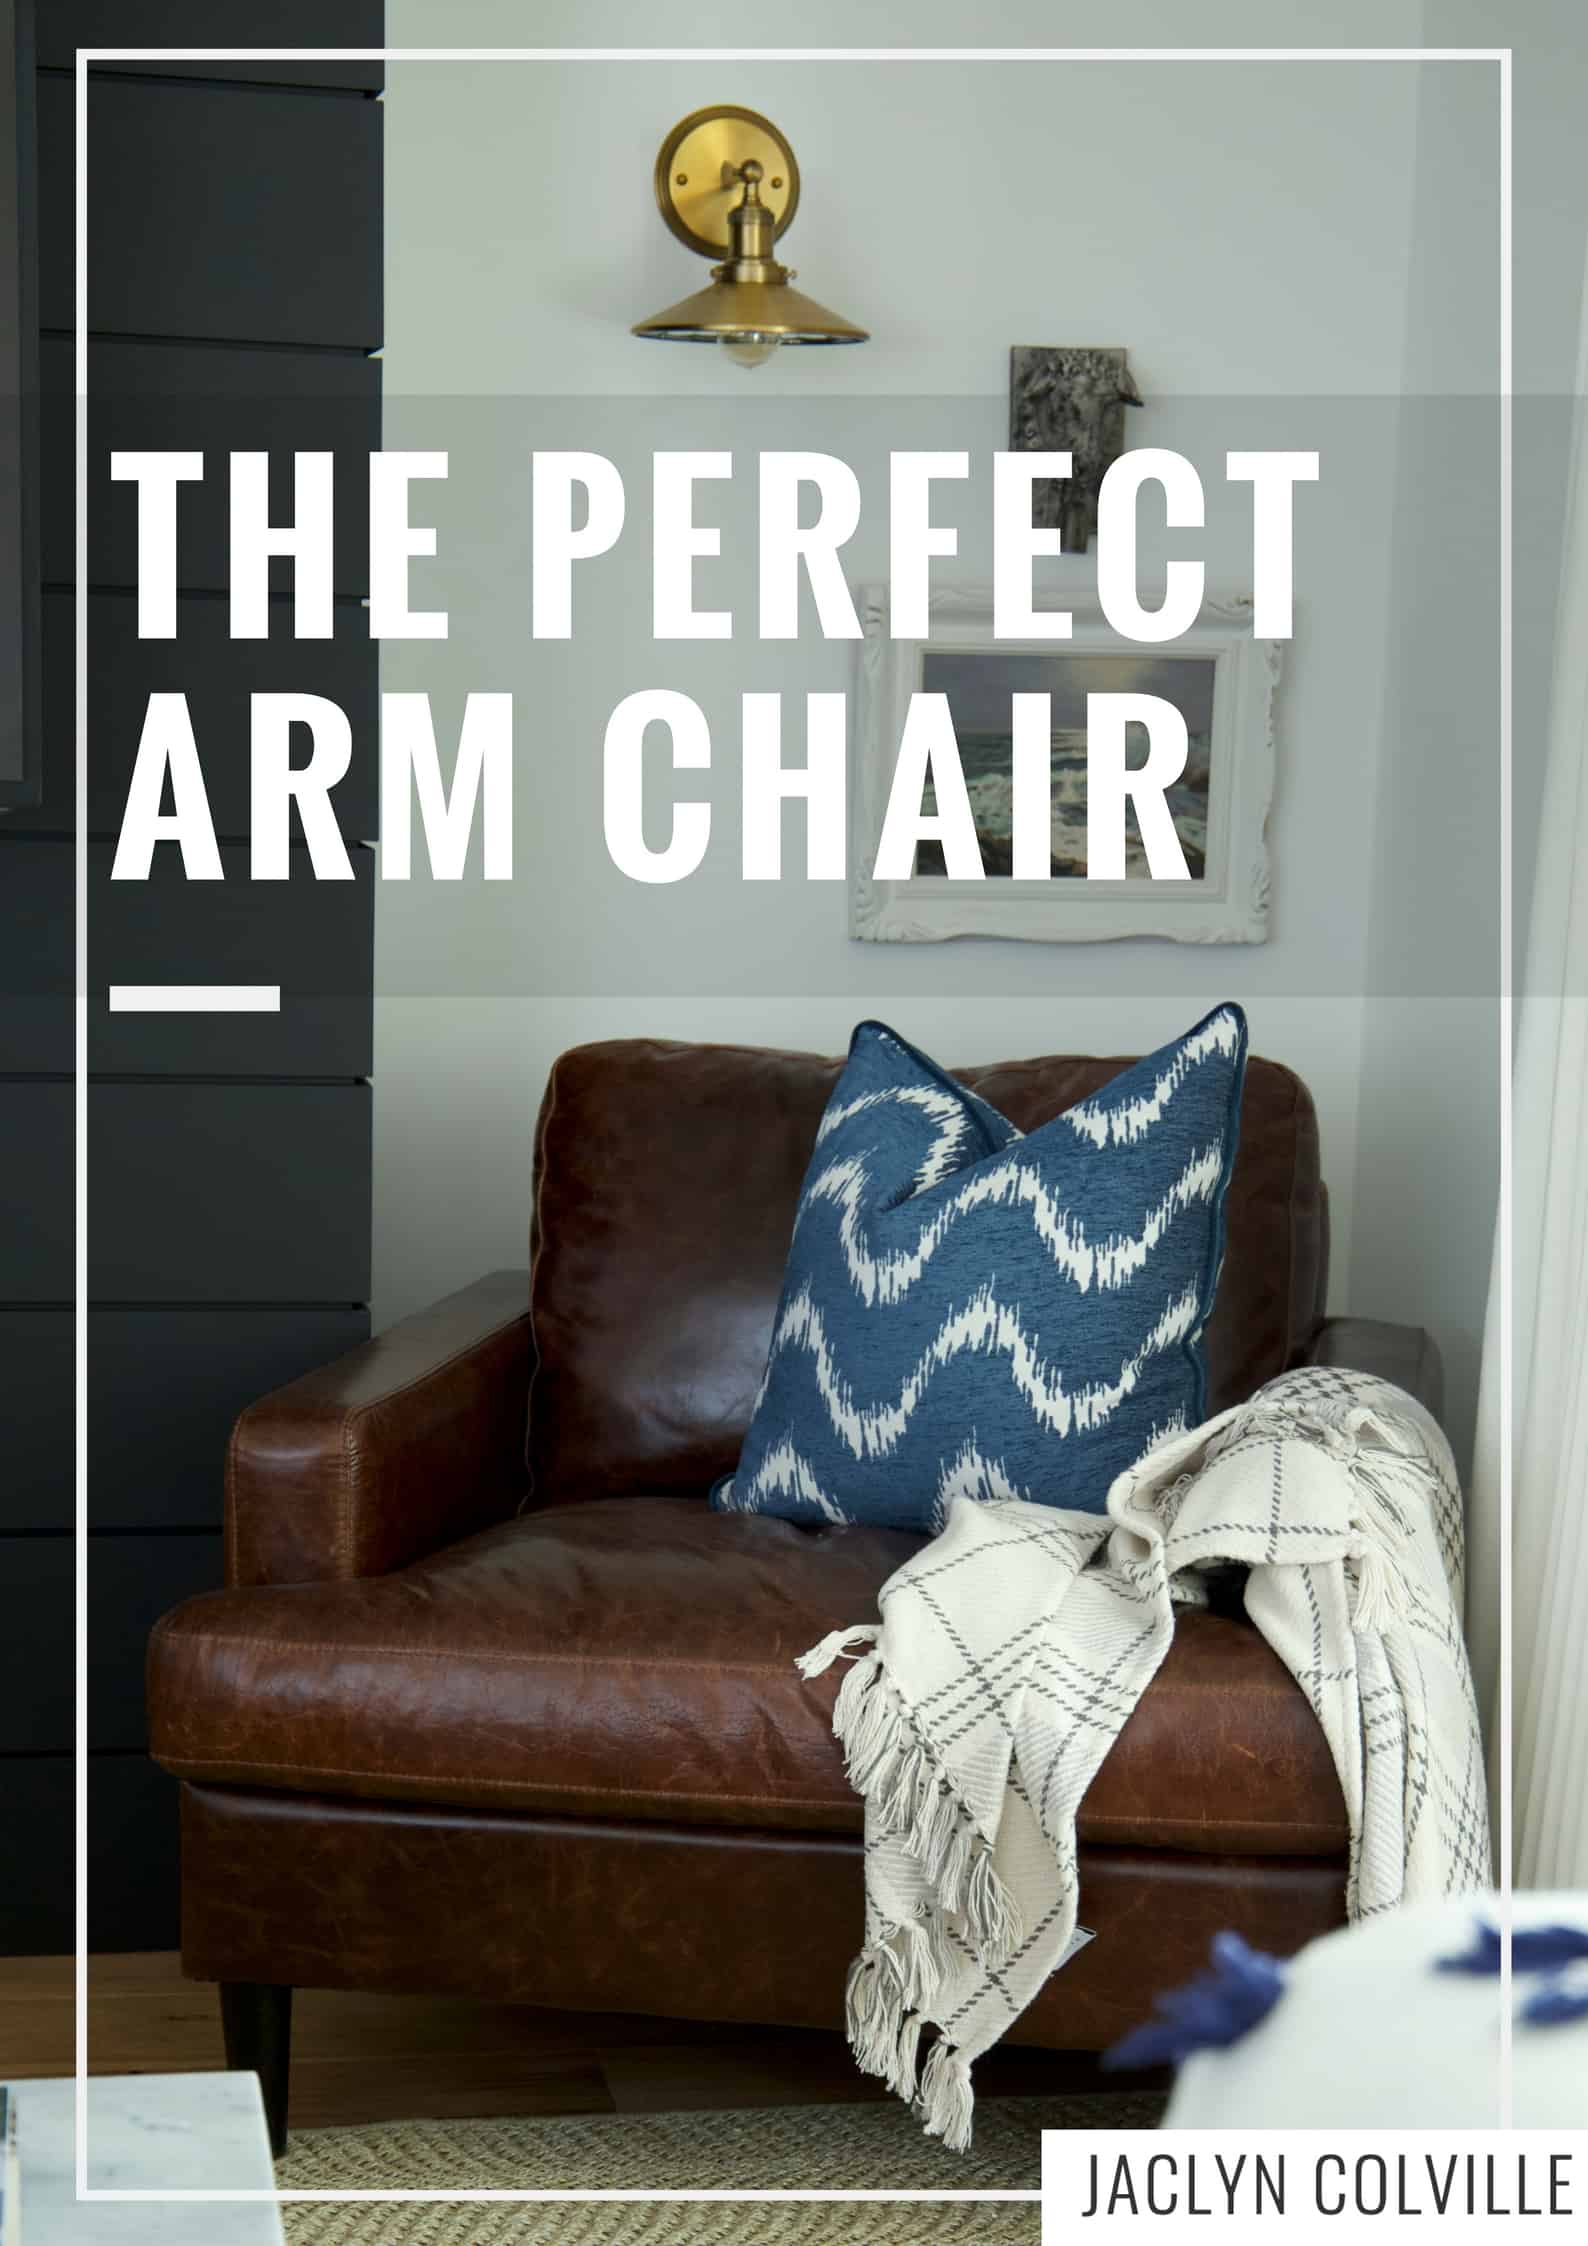 FIND THE PERFECT ARM CHAIR IN 5 STEPS!